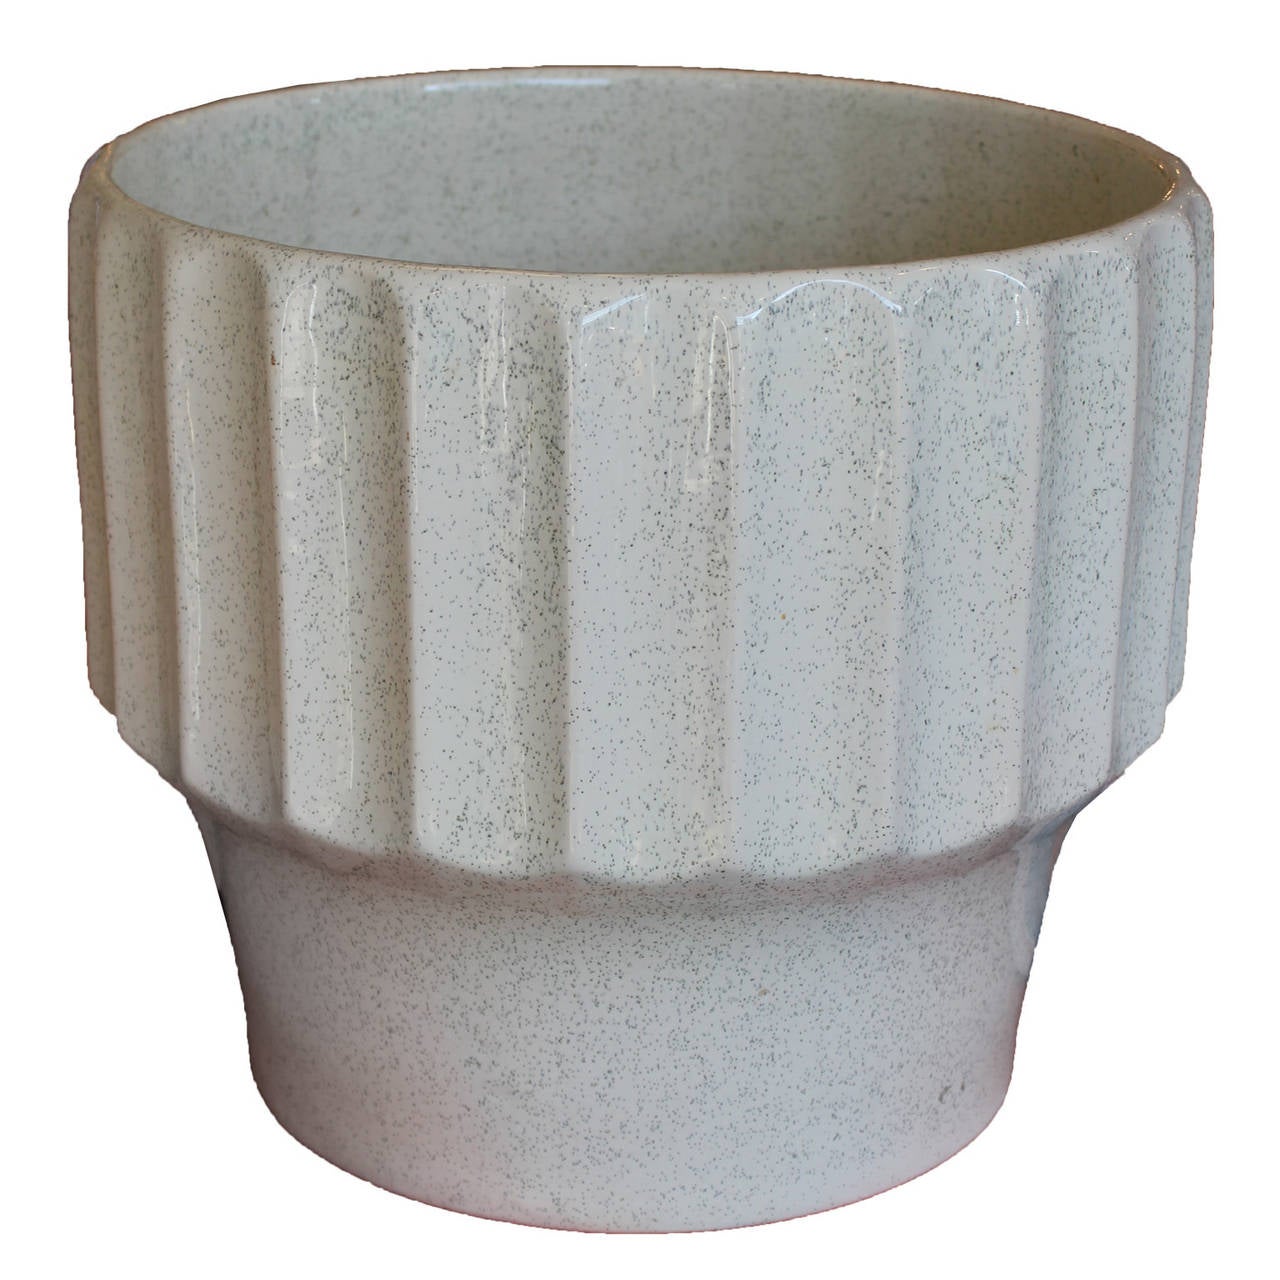 Beautiful Robinson Ransbottom planter finished in a white speckle glaze. Planter is in excellent vintage condition.